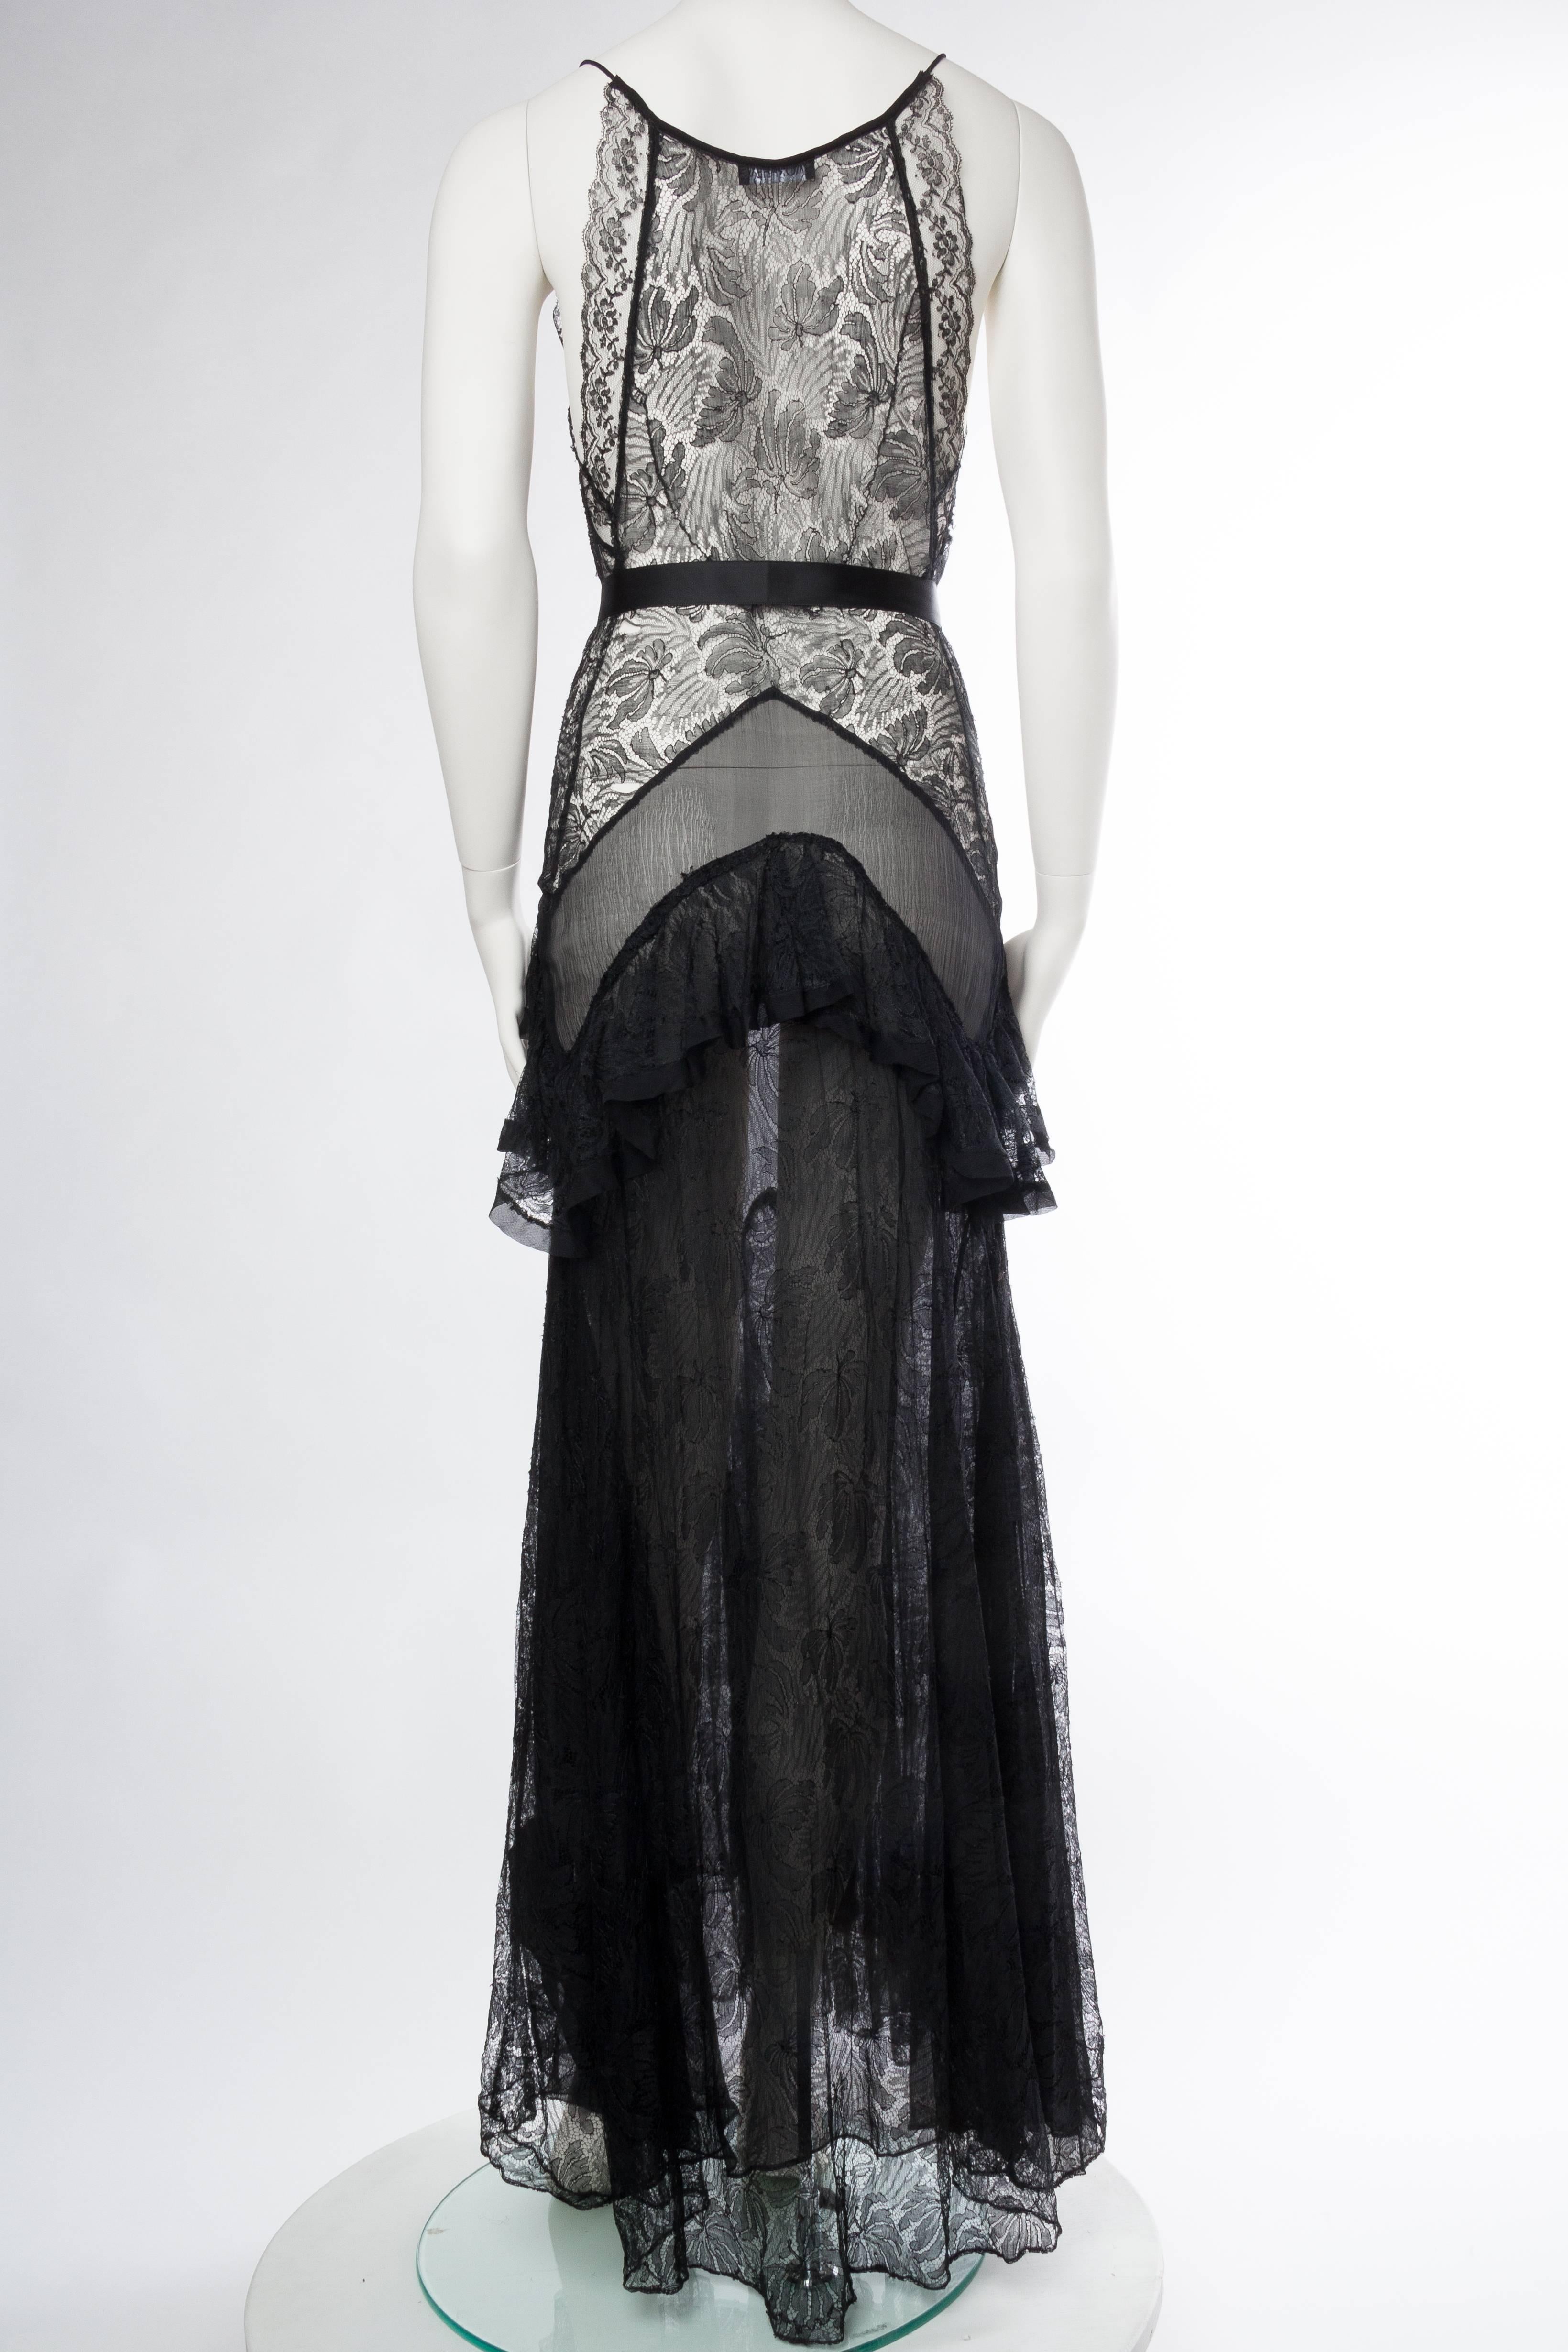 Women's 1930s Sheer Silk Gown with Victorian Lace